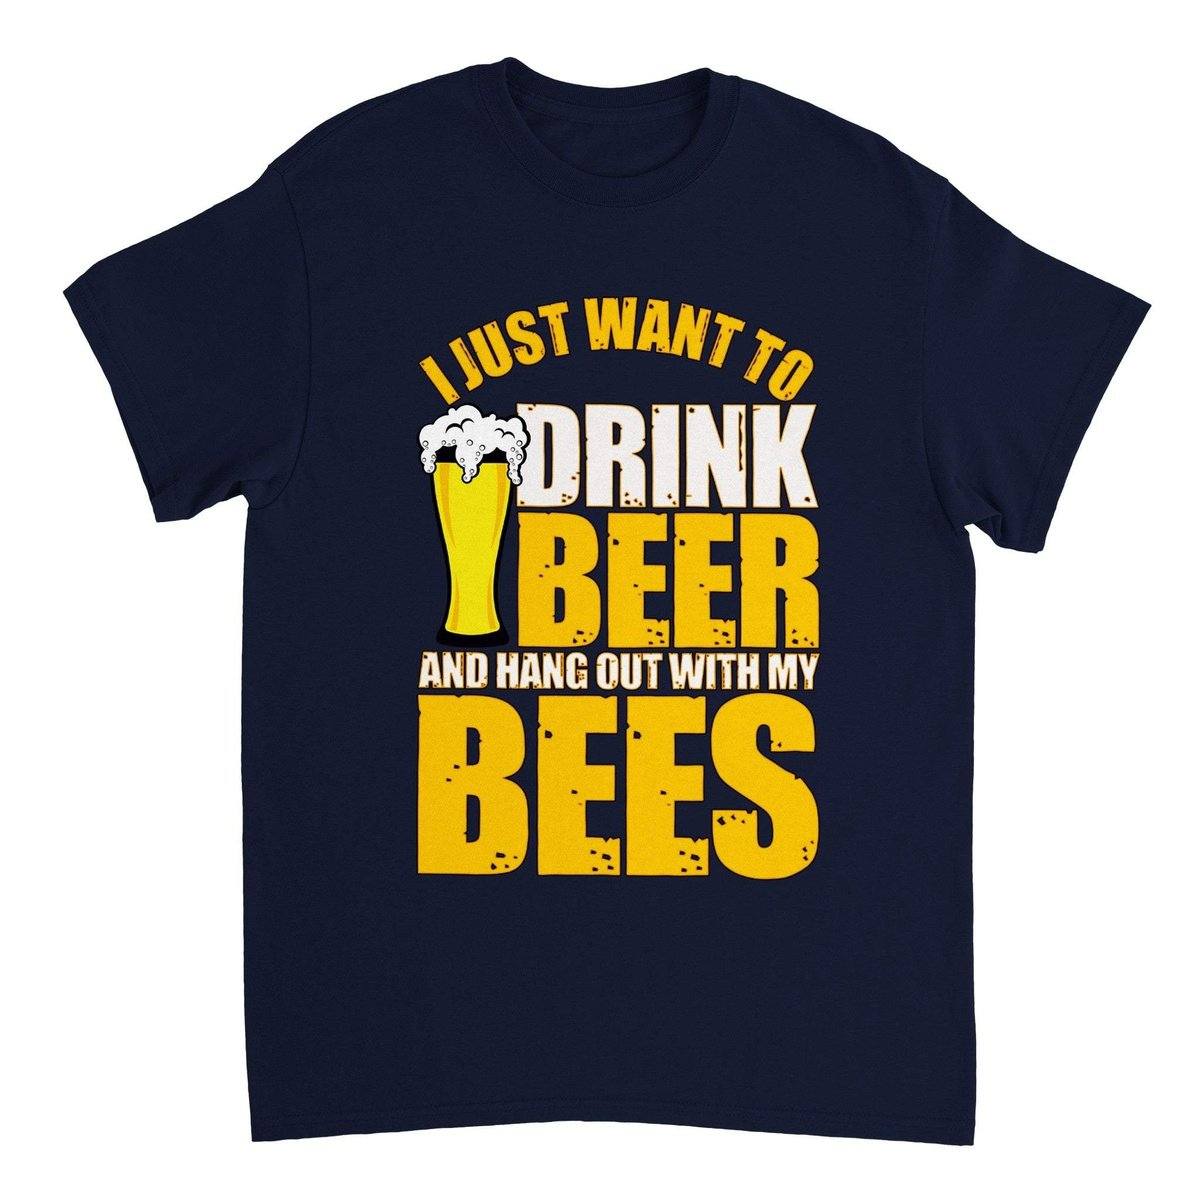 I Just Want To Drink Beer And Hang Out With My Bees T-Shirt - Funny Bee Beer Tshirt - Unisex Crewneck T-shirt Australia Online Color Navy / S